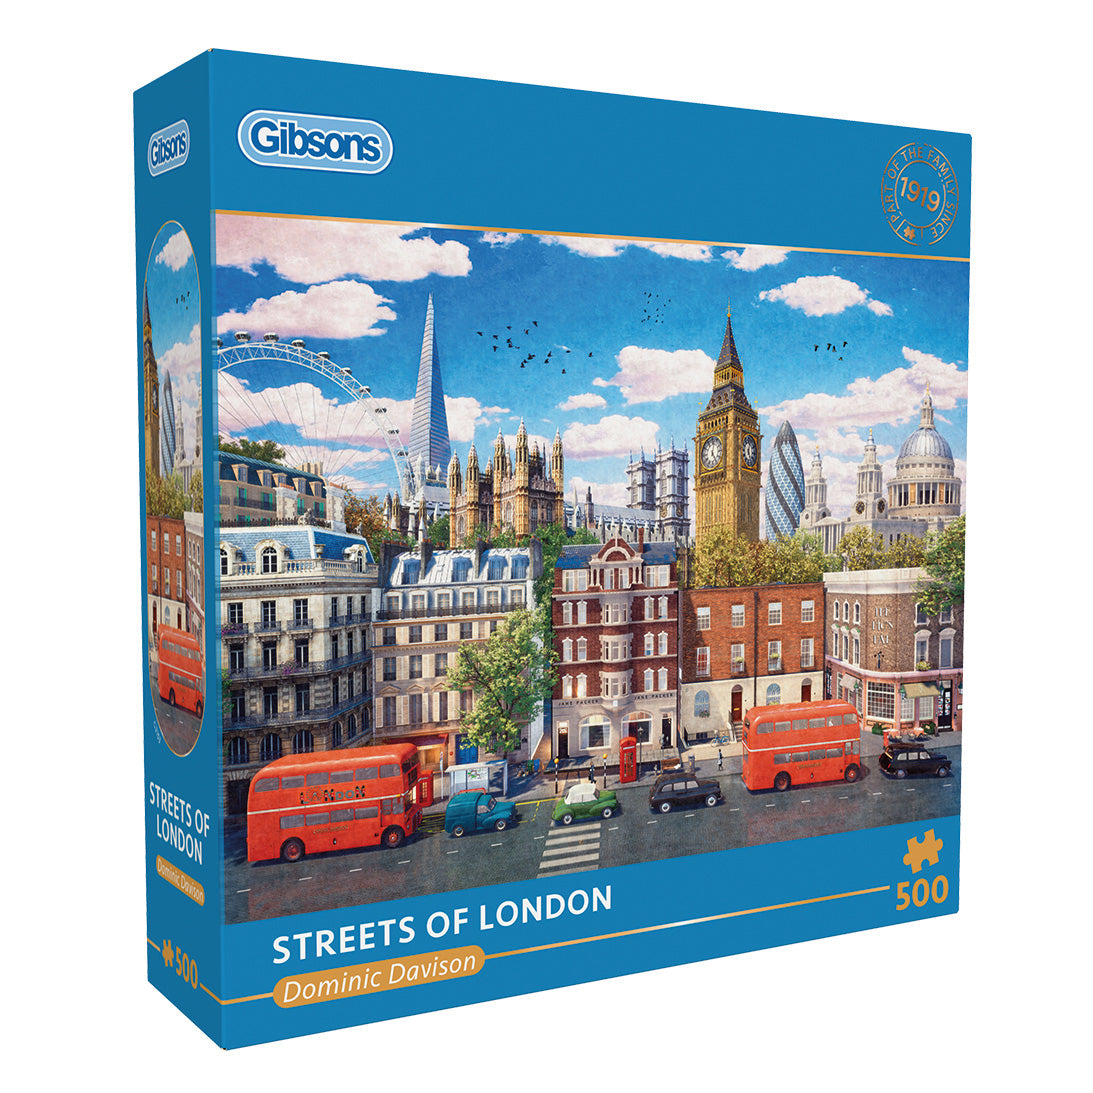 Gibsons - Streets of London - 500 Piece Jigsaw Puzzle